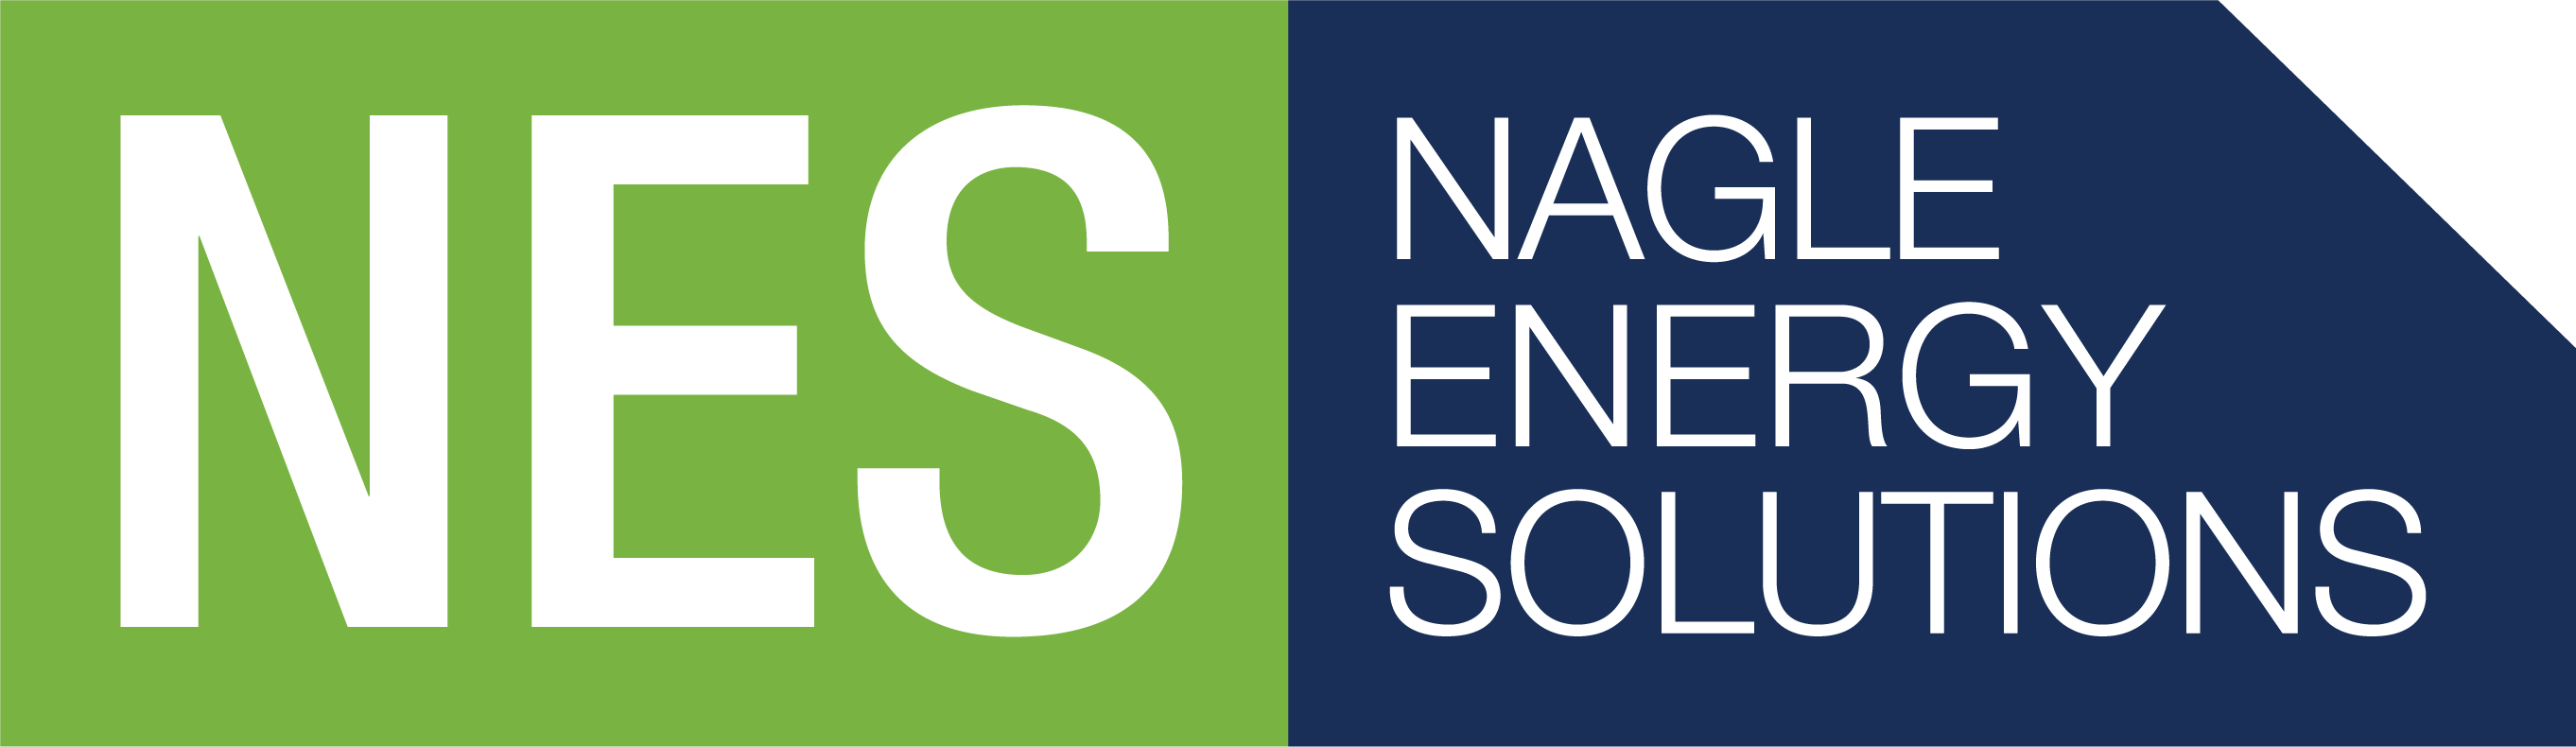 Nagle Energy Solutions